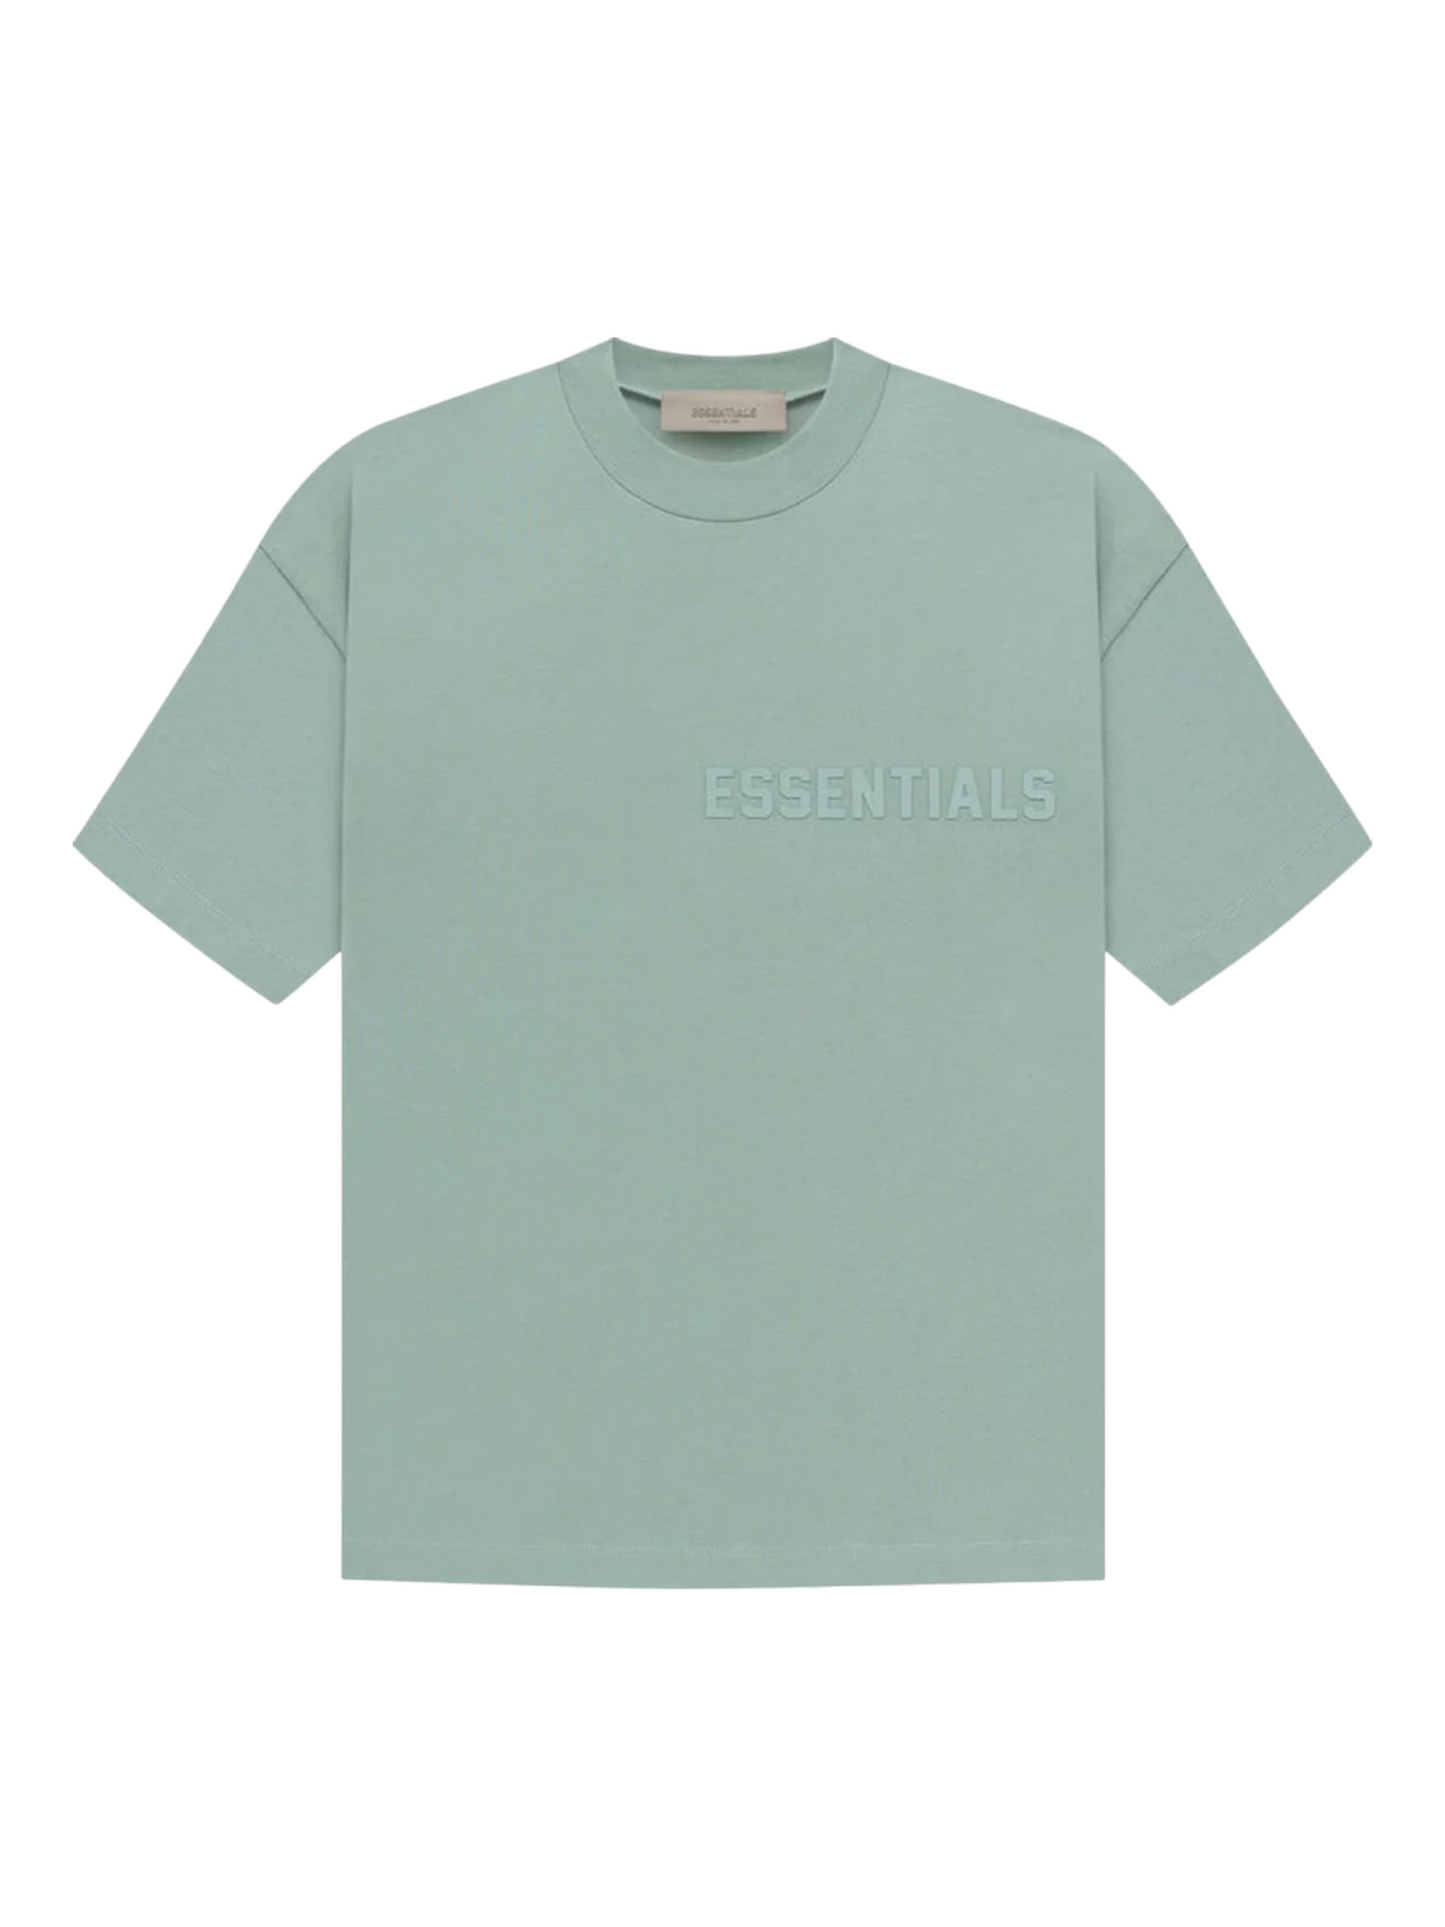 Essentials Fear of God Sycamore Short Sleeve T-Shirt SS23  — Genuine Design Luxury Consignment Calgary, Canada New & Pre-Owned Authentic Clothing, Shoes, Accessories.